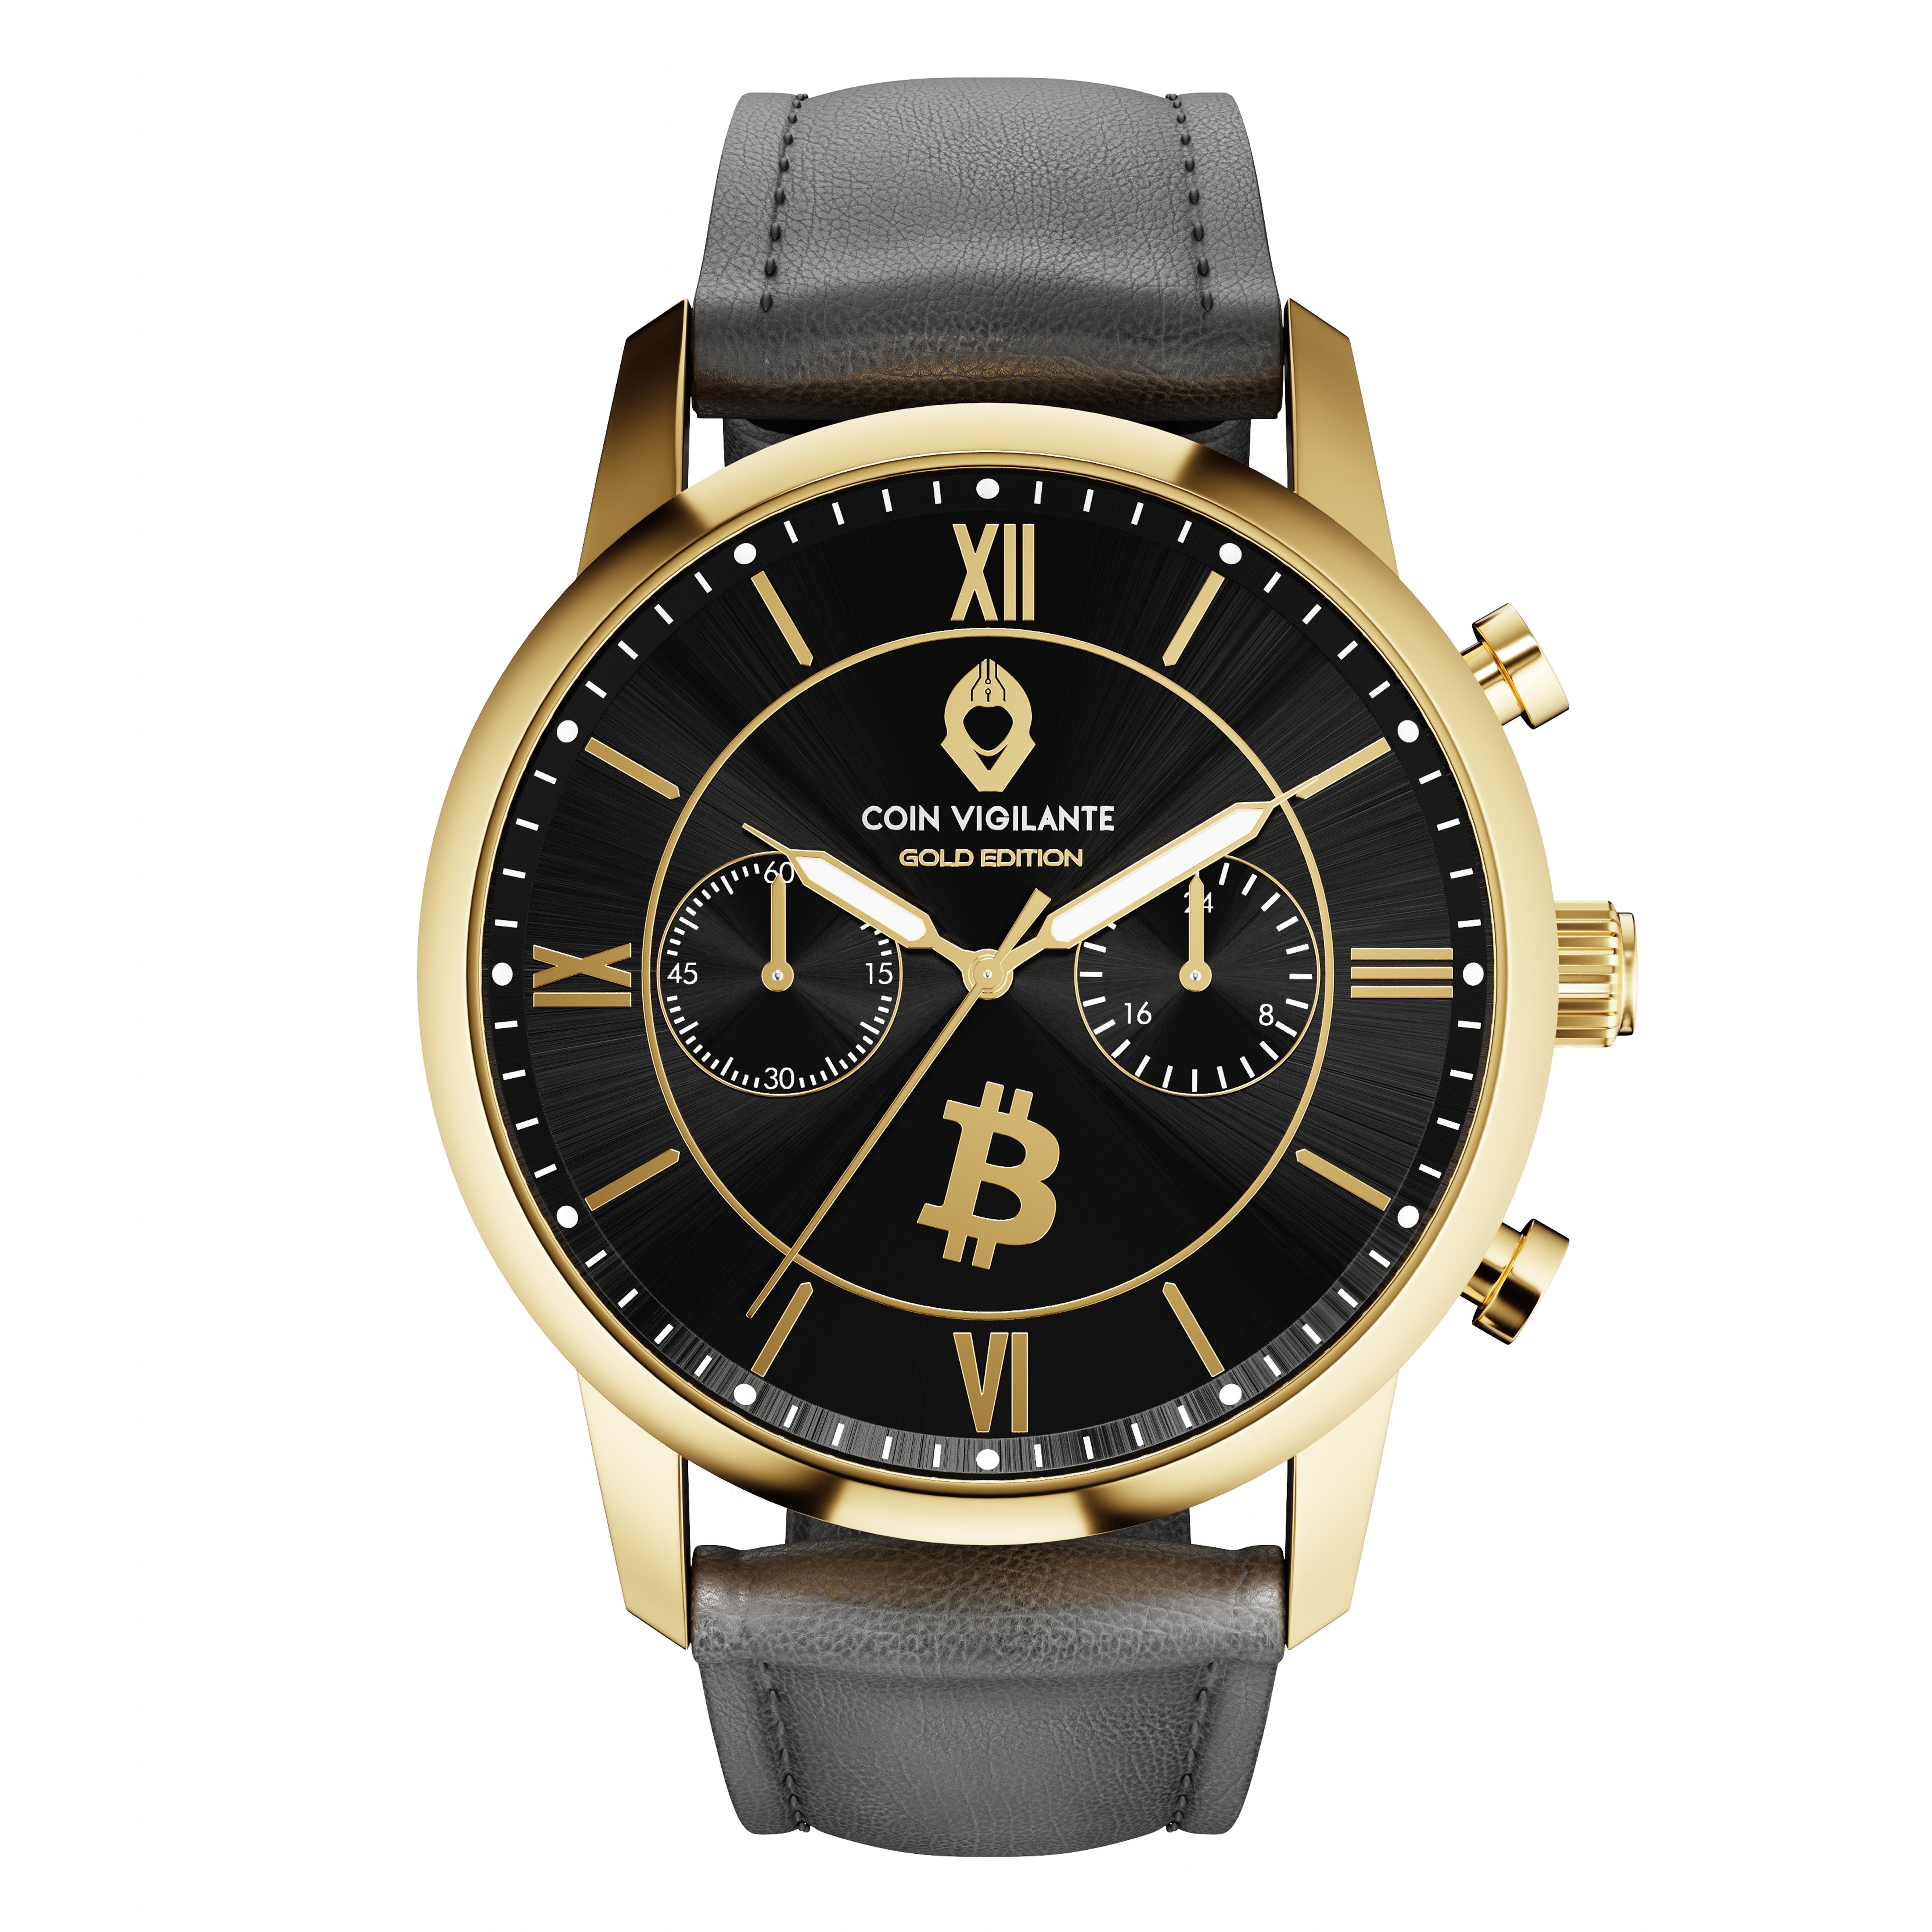 Coin Vigilante's Bitcoin Watch: Gold Edition with Exclusive NFT